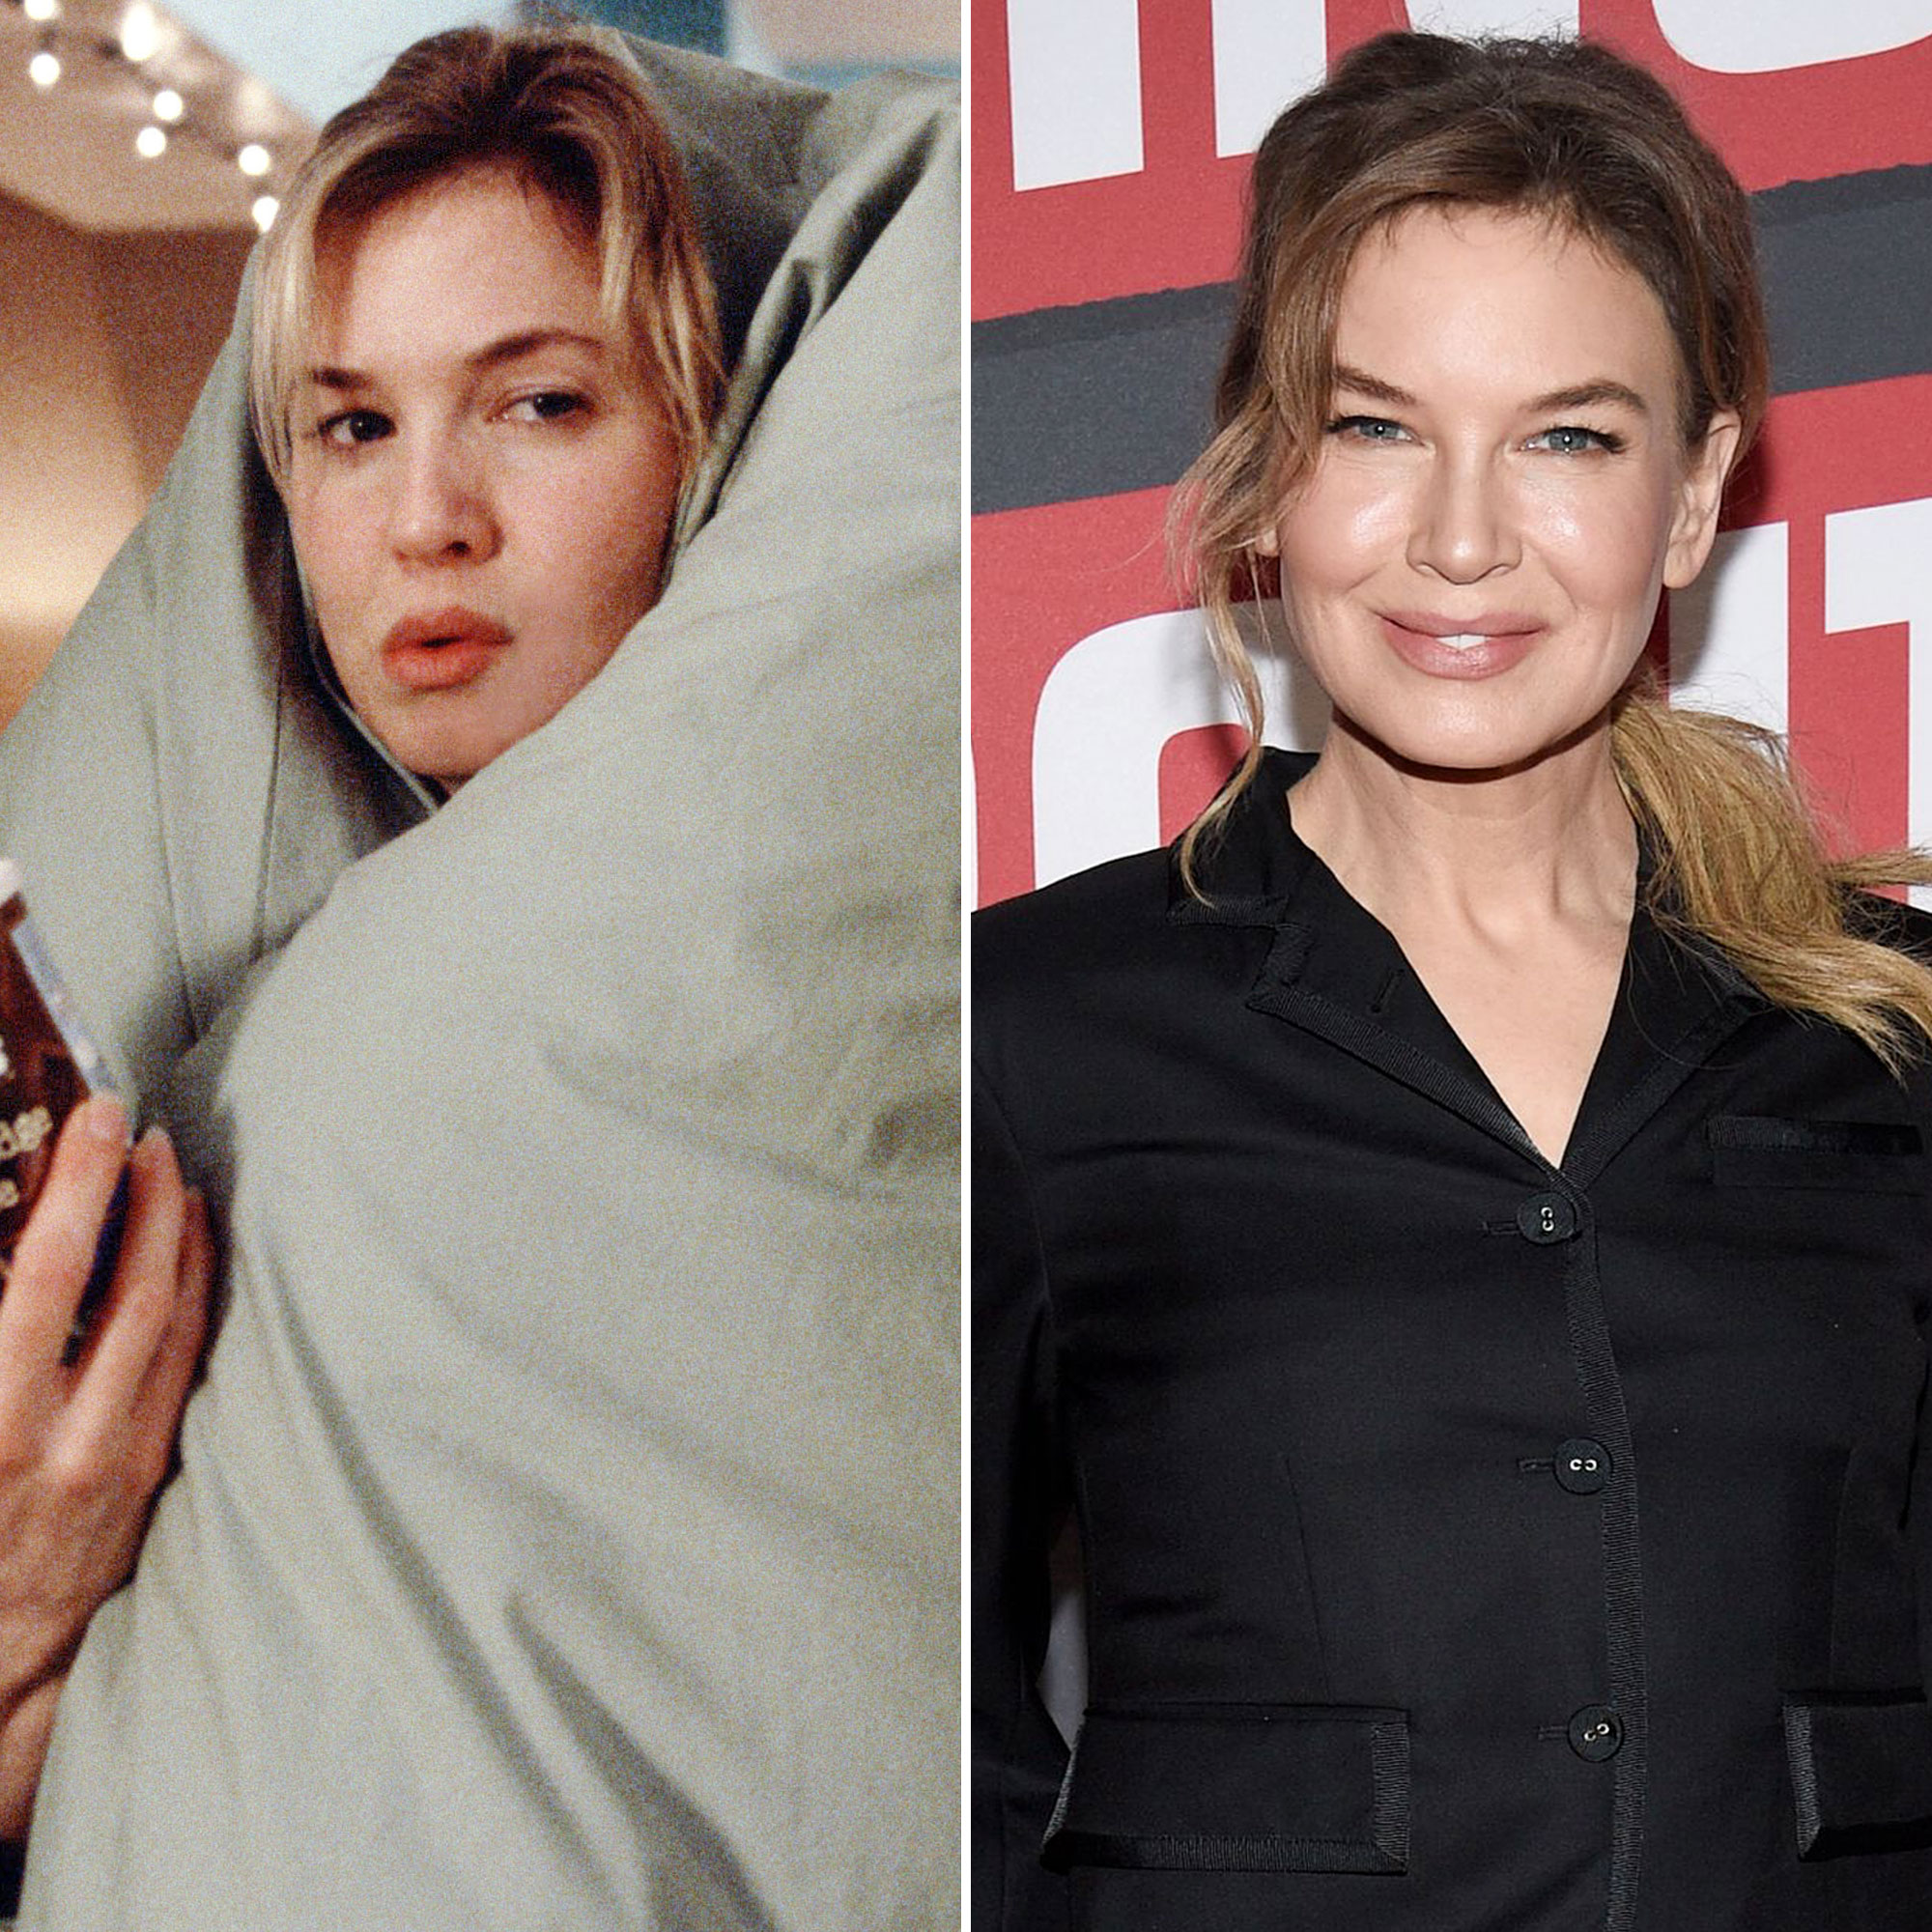 Bridget Jones's Diary': Unique and Cool Things to Know